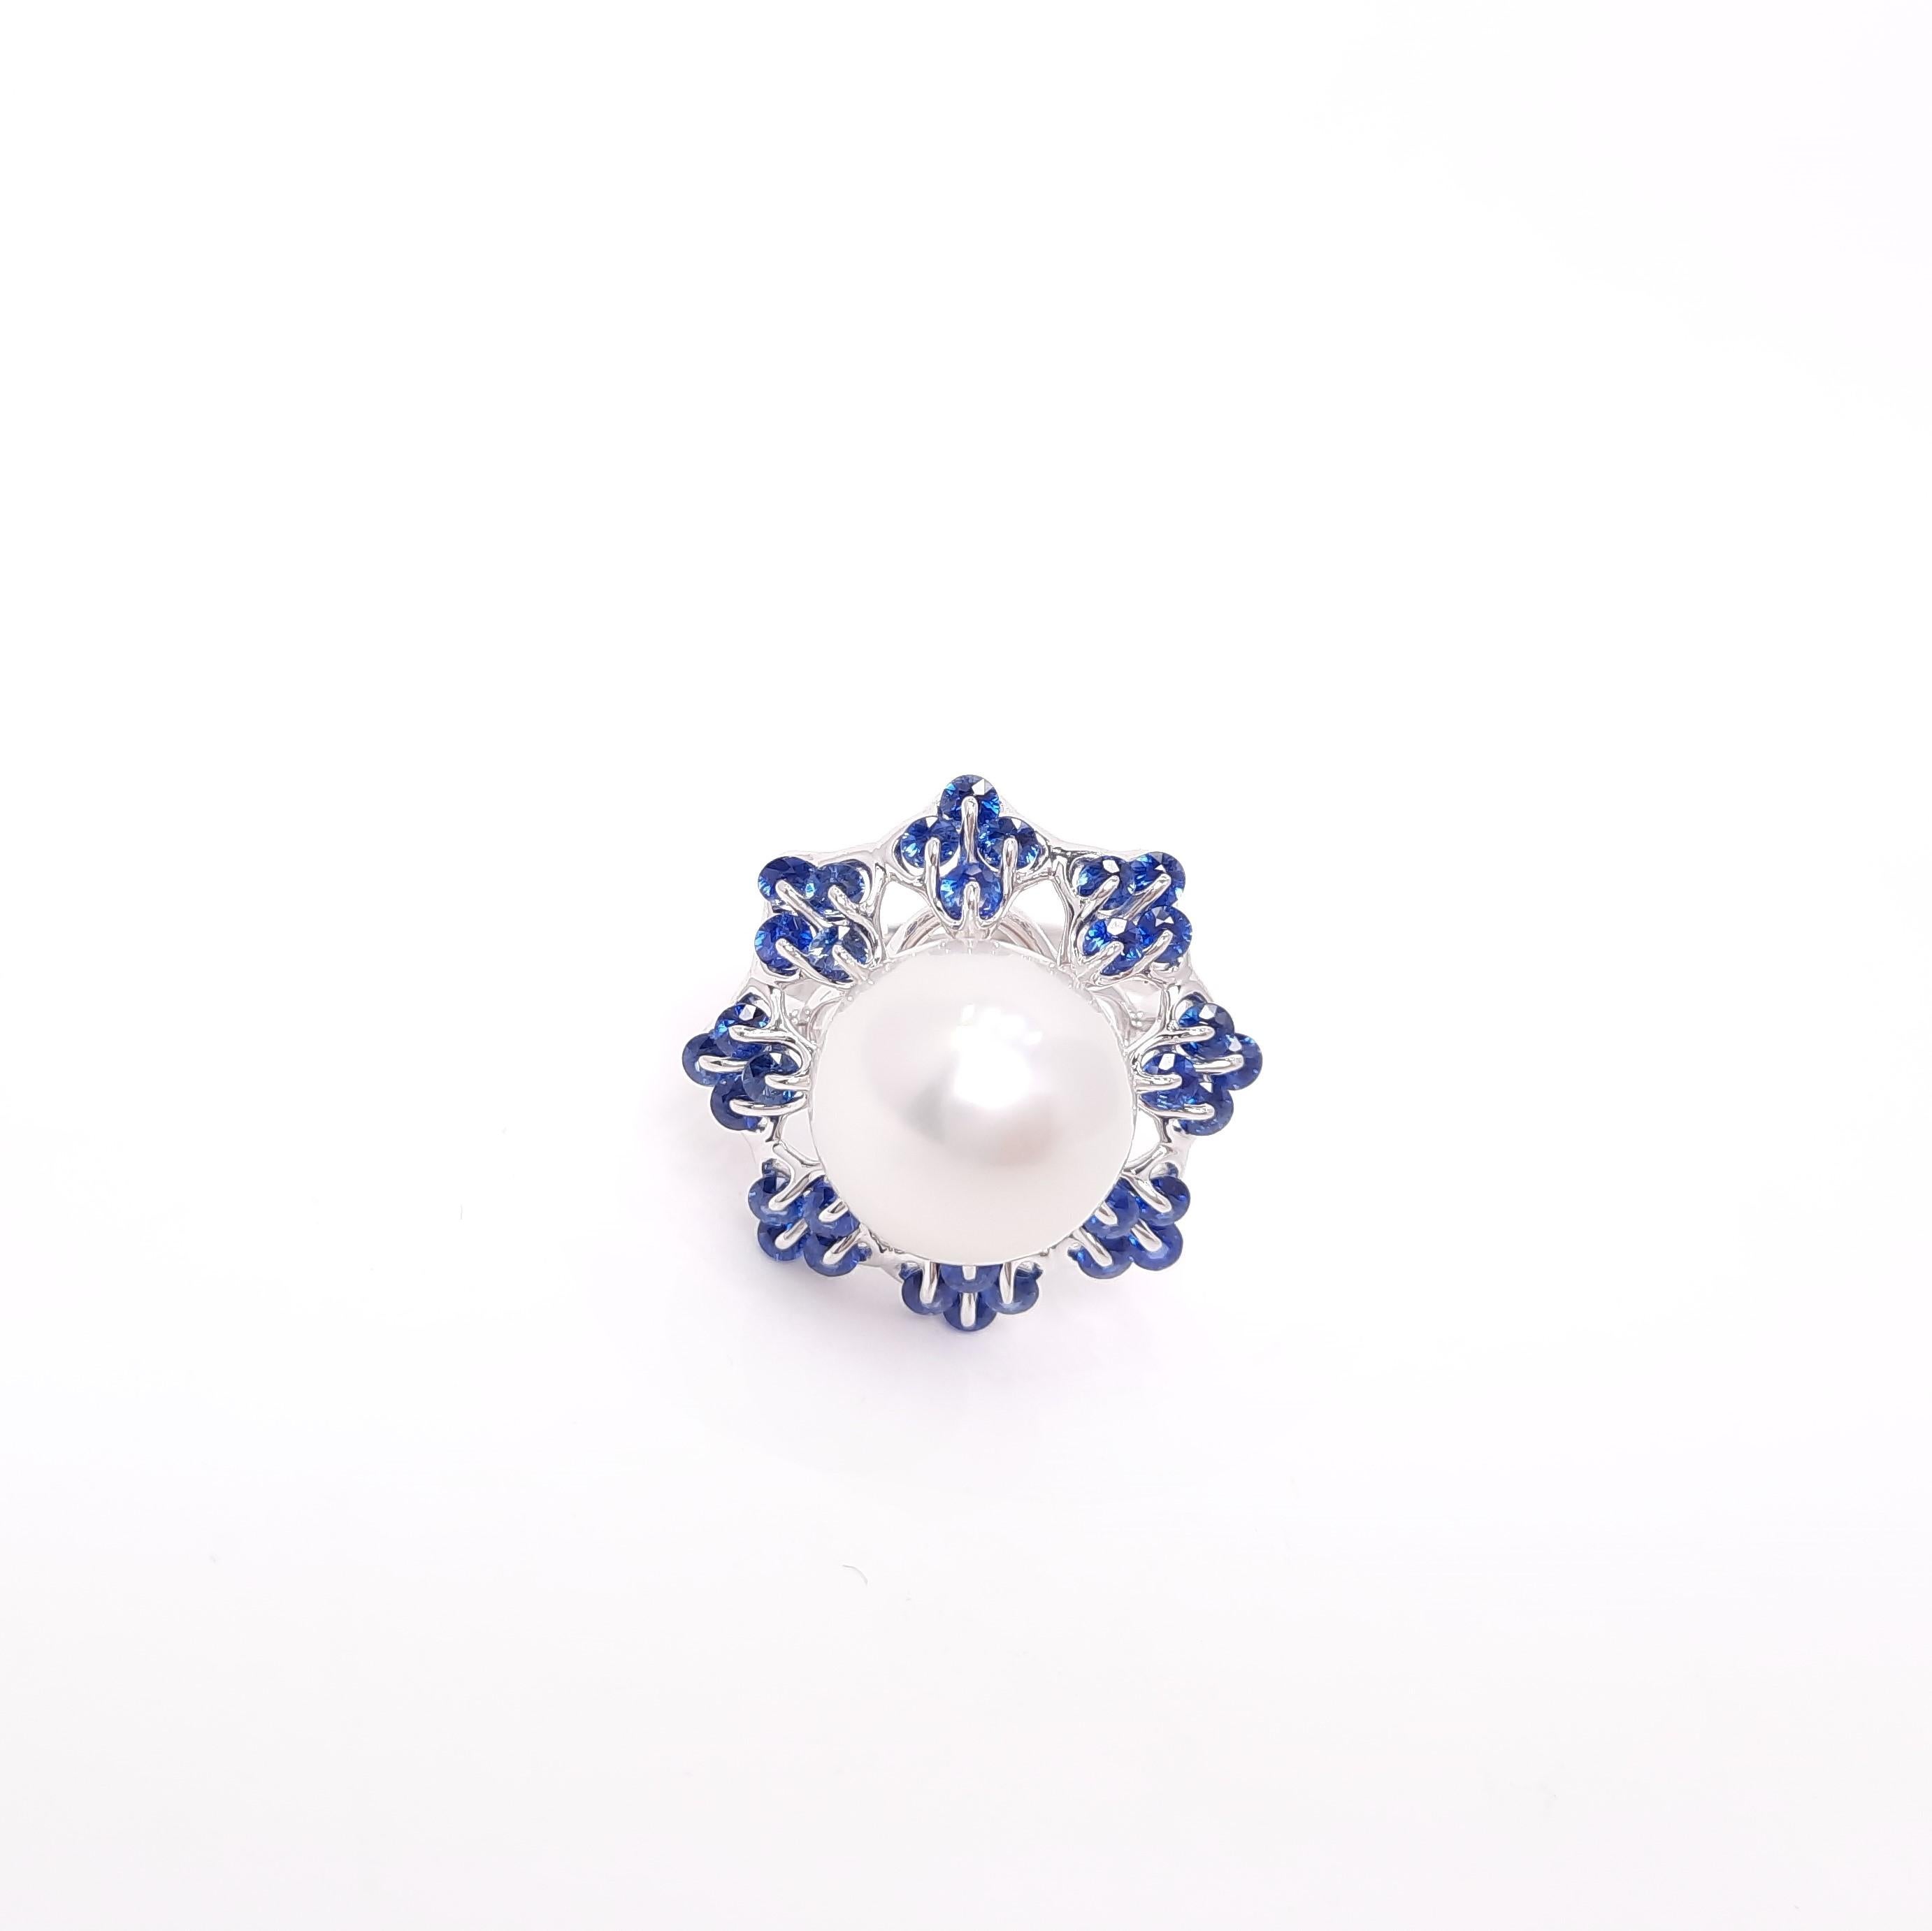 The top quality 11-12mm round South Sea Pearl is elegantly mounted in our unique jewellery setting, Waltzing Brilliance. On the ballet tutus -like design frame, radiant blue sapphires swirl 360 degrees on the setting just like graceful ballerinas.